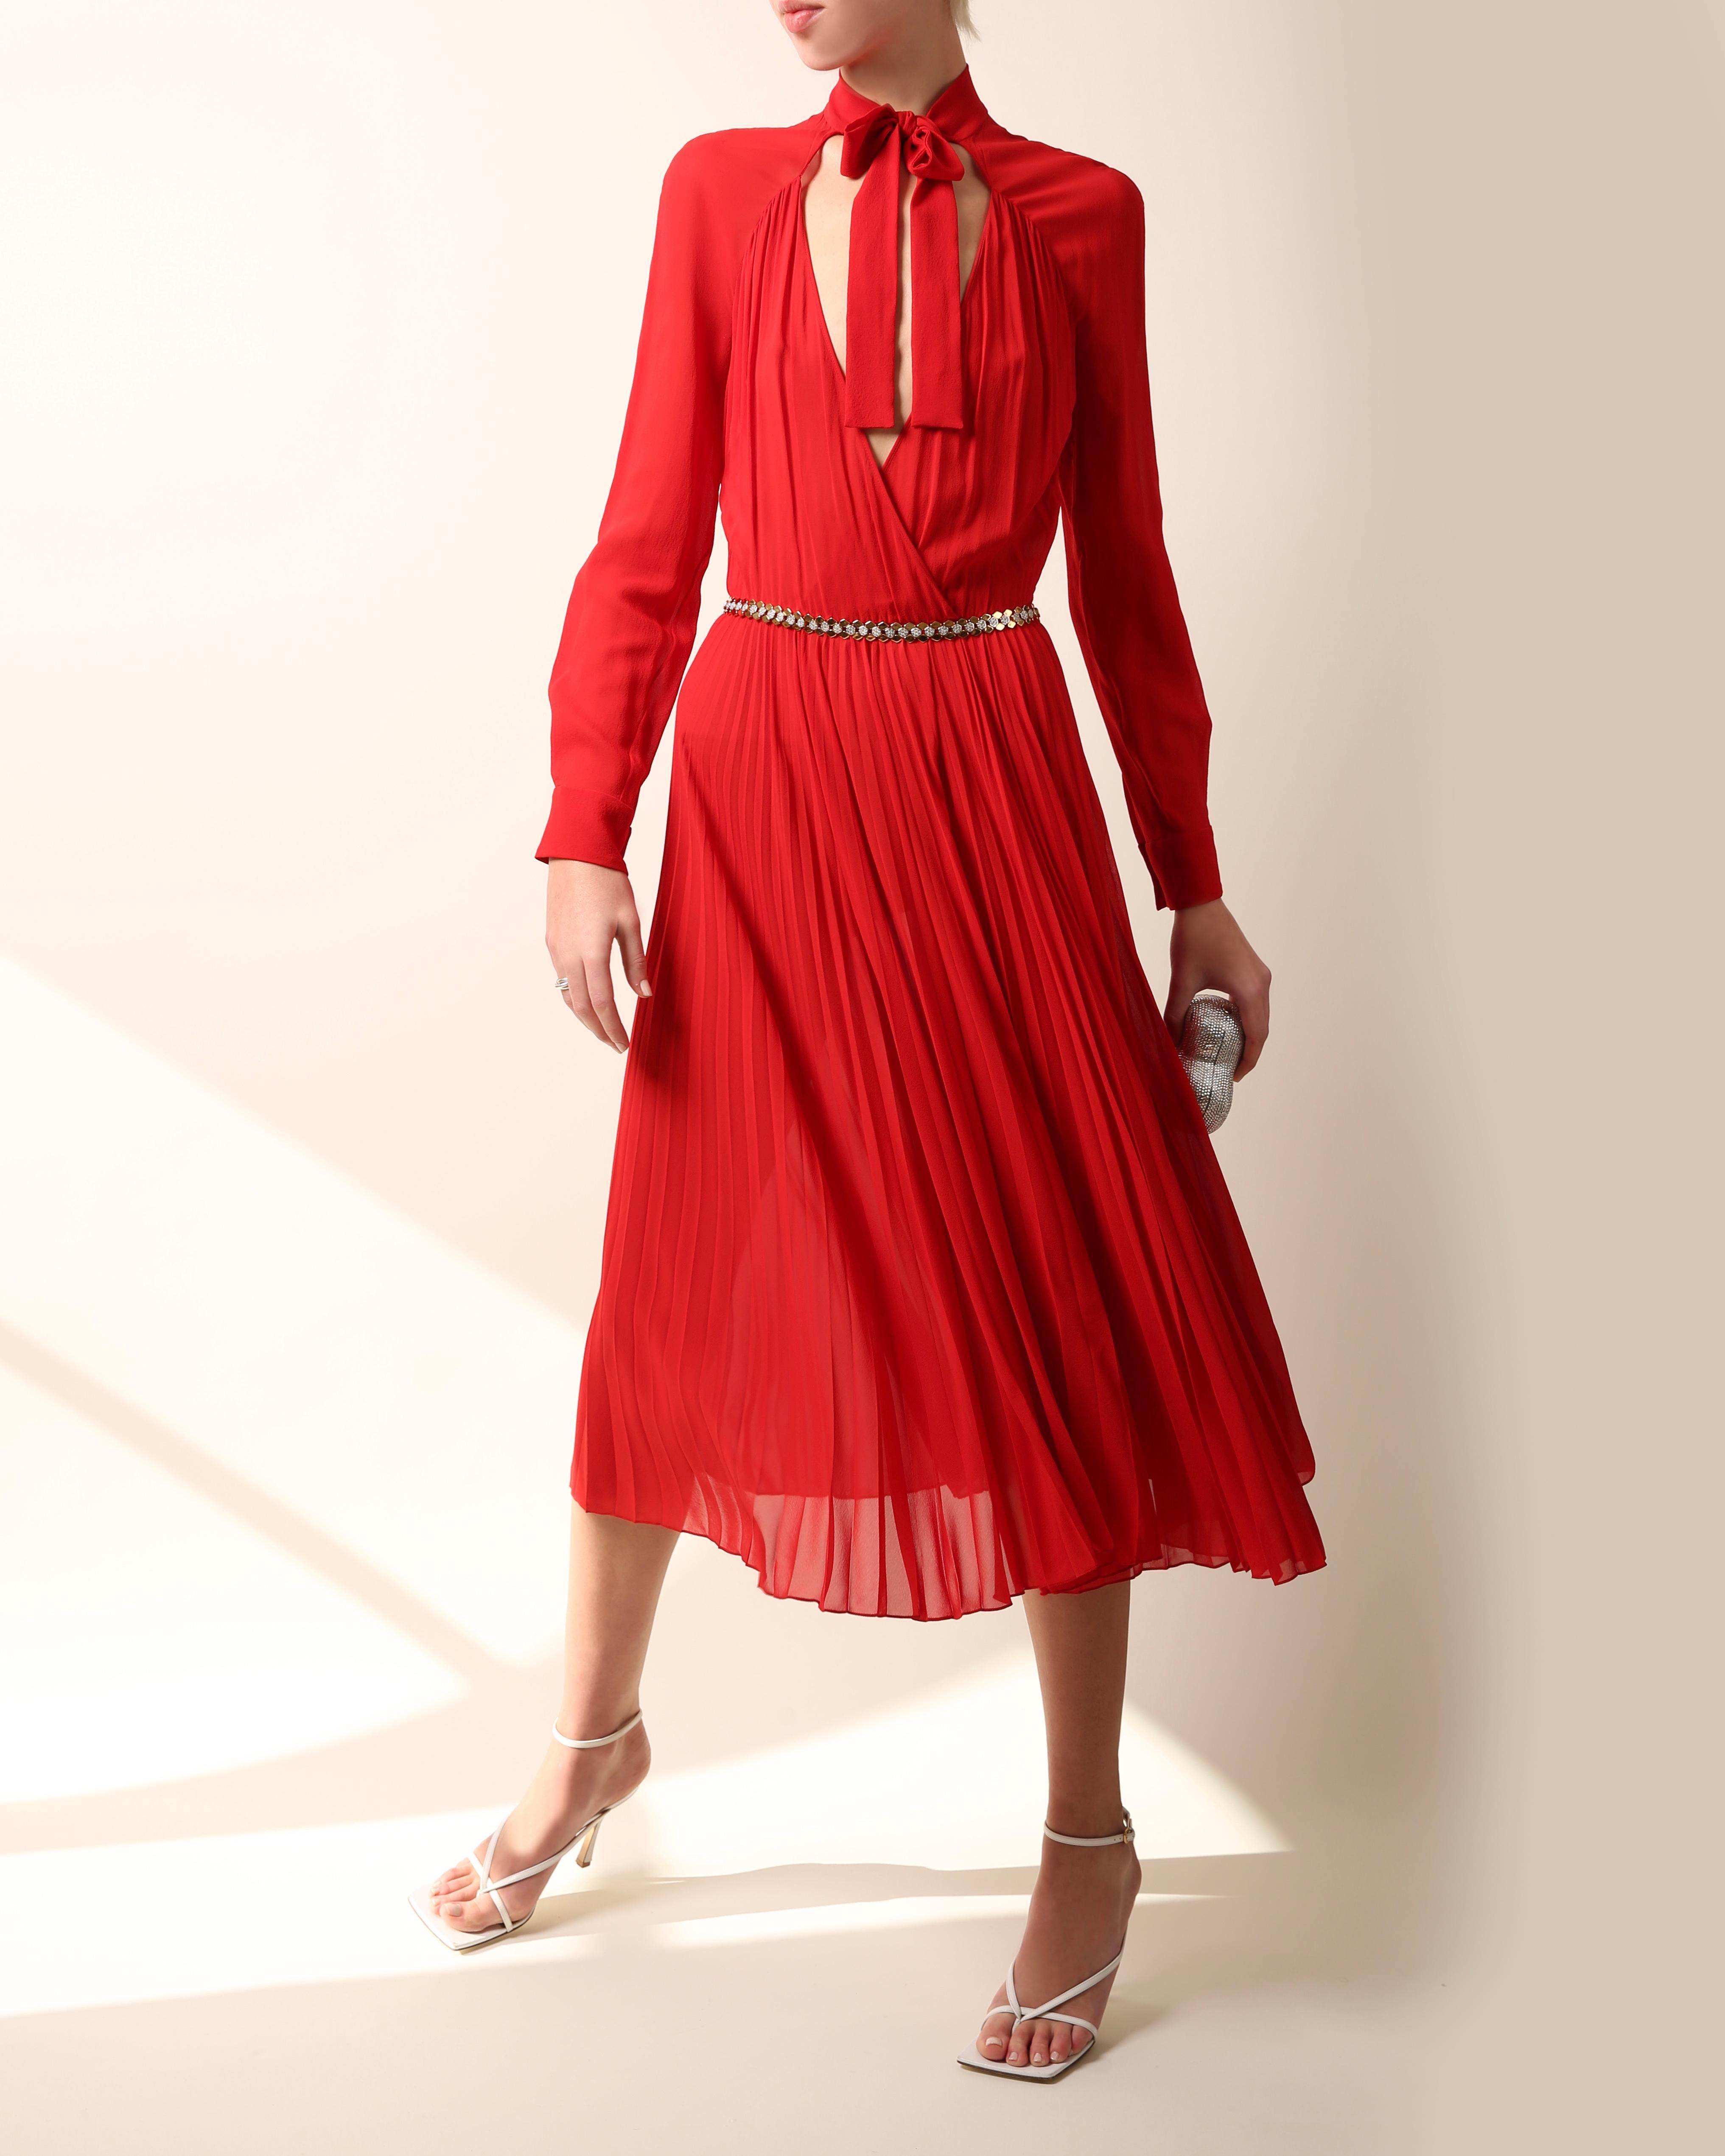 Christian Dior S/S 2018 red midi dress in silk
Low cut cross over upper
Cinched in waist
Plisse skirt
Pussy bow necktie 
Concealed side zip

FREE SHIPPING WORLDWIDE!!!

Composition:
100% Silk

Size:
FR 40 but will work for different sizes depending